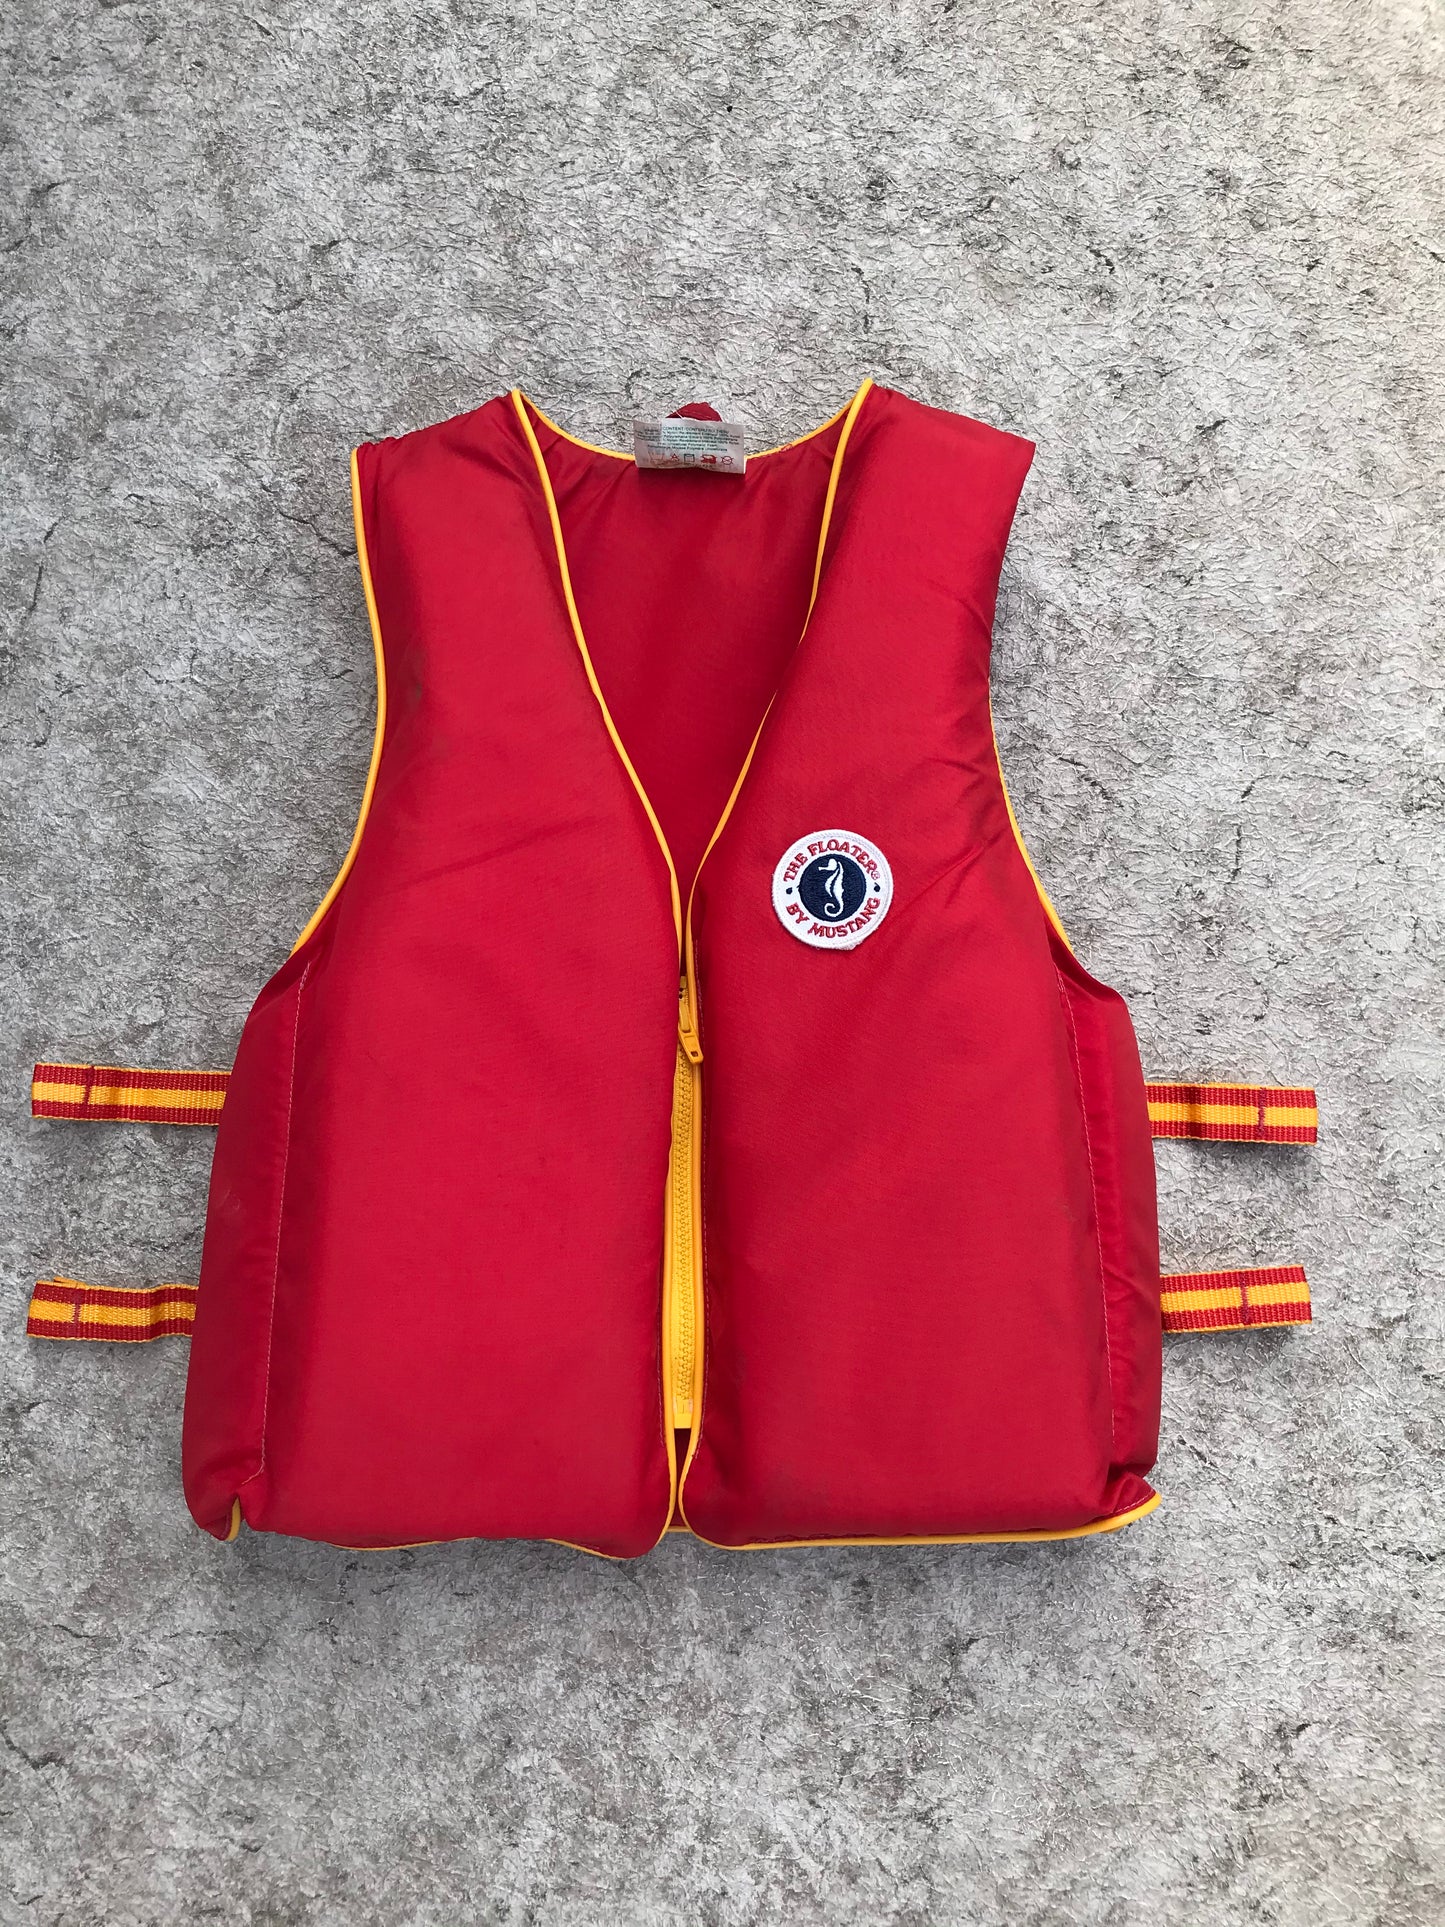 Life Jacket Adult Size Small Adjustable Mustang Red Yellow Minor Marks